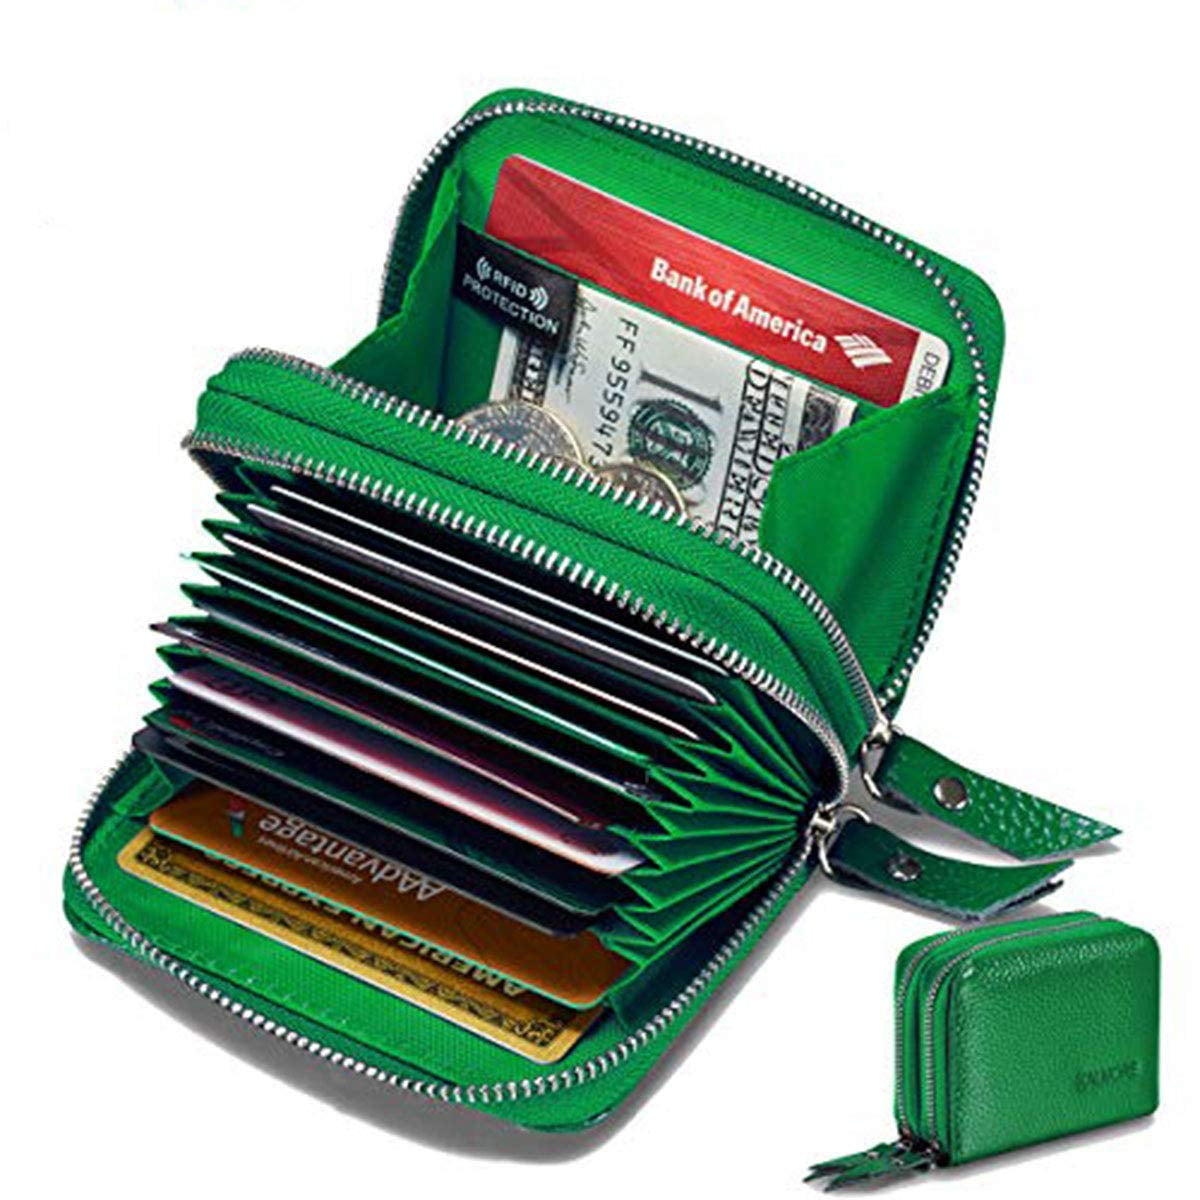 Smart Trifold multi utility wallet with 6 key ring hooks side coin zip pocket with snap button close & RFID shield. 3 credit card holder